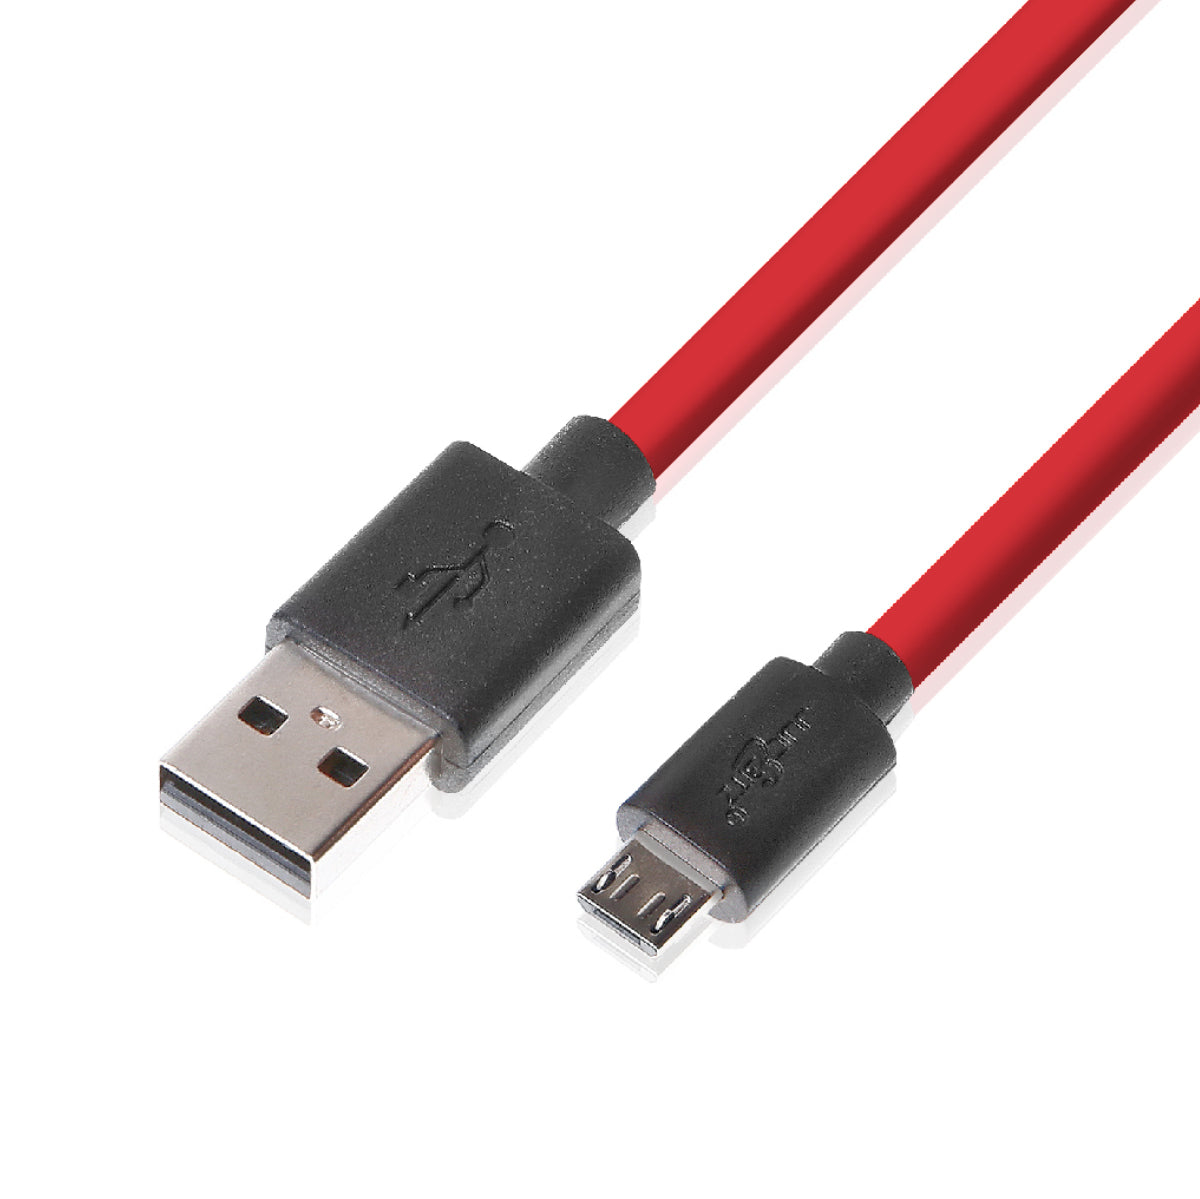 USB 2.0 to Micro-USB Fast Charger Cable High Speed Data Transfer Lead - Red